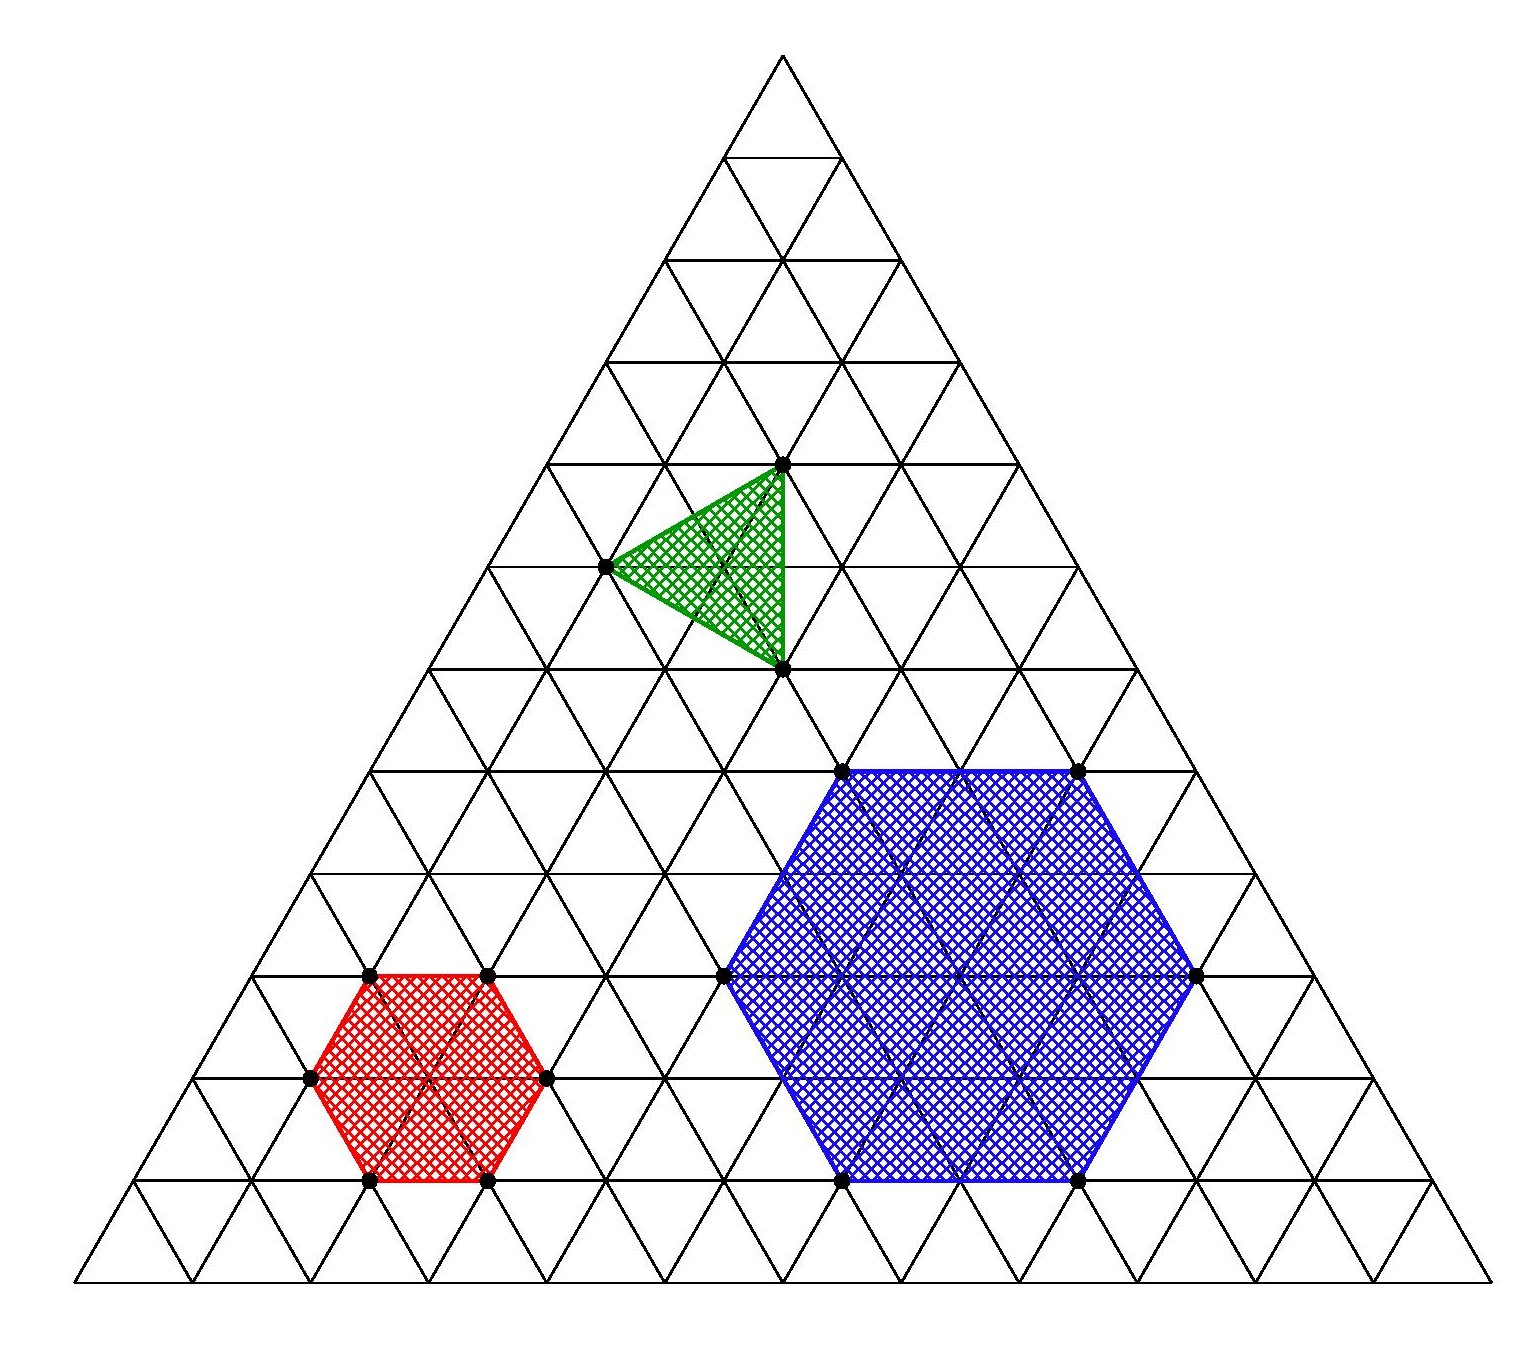 There are no regular polygons in the hexagonal lattice, except ...